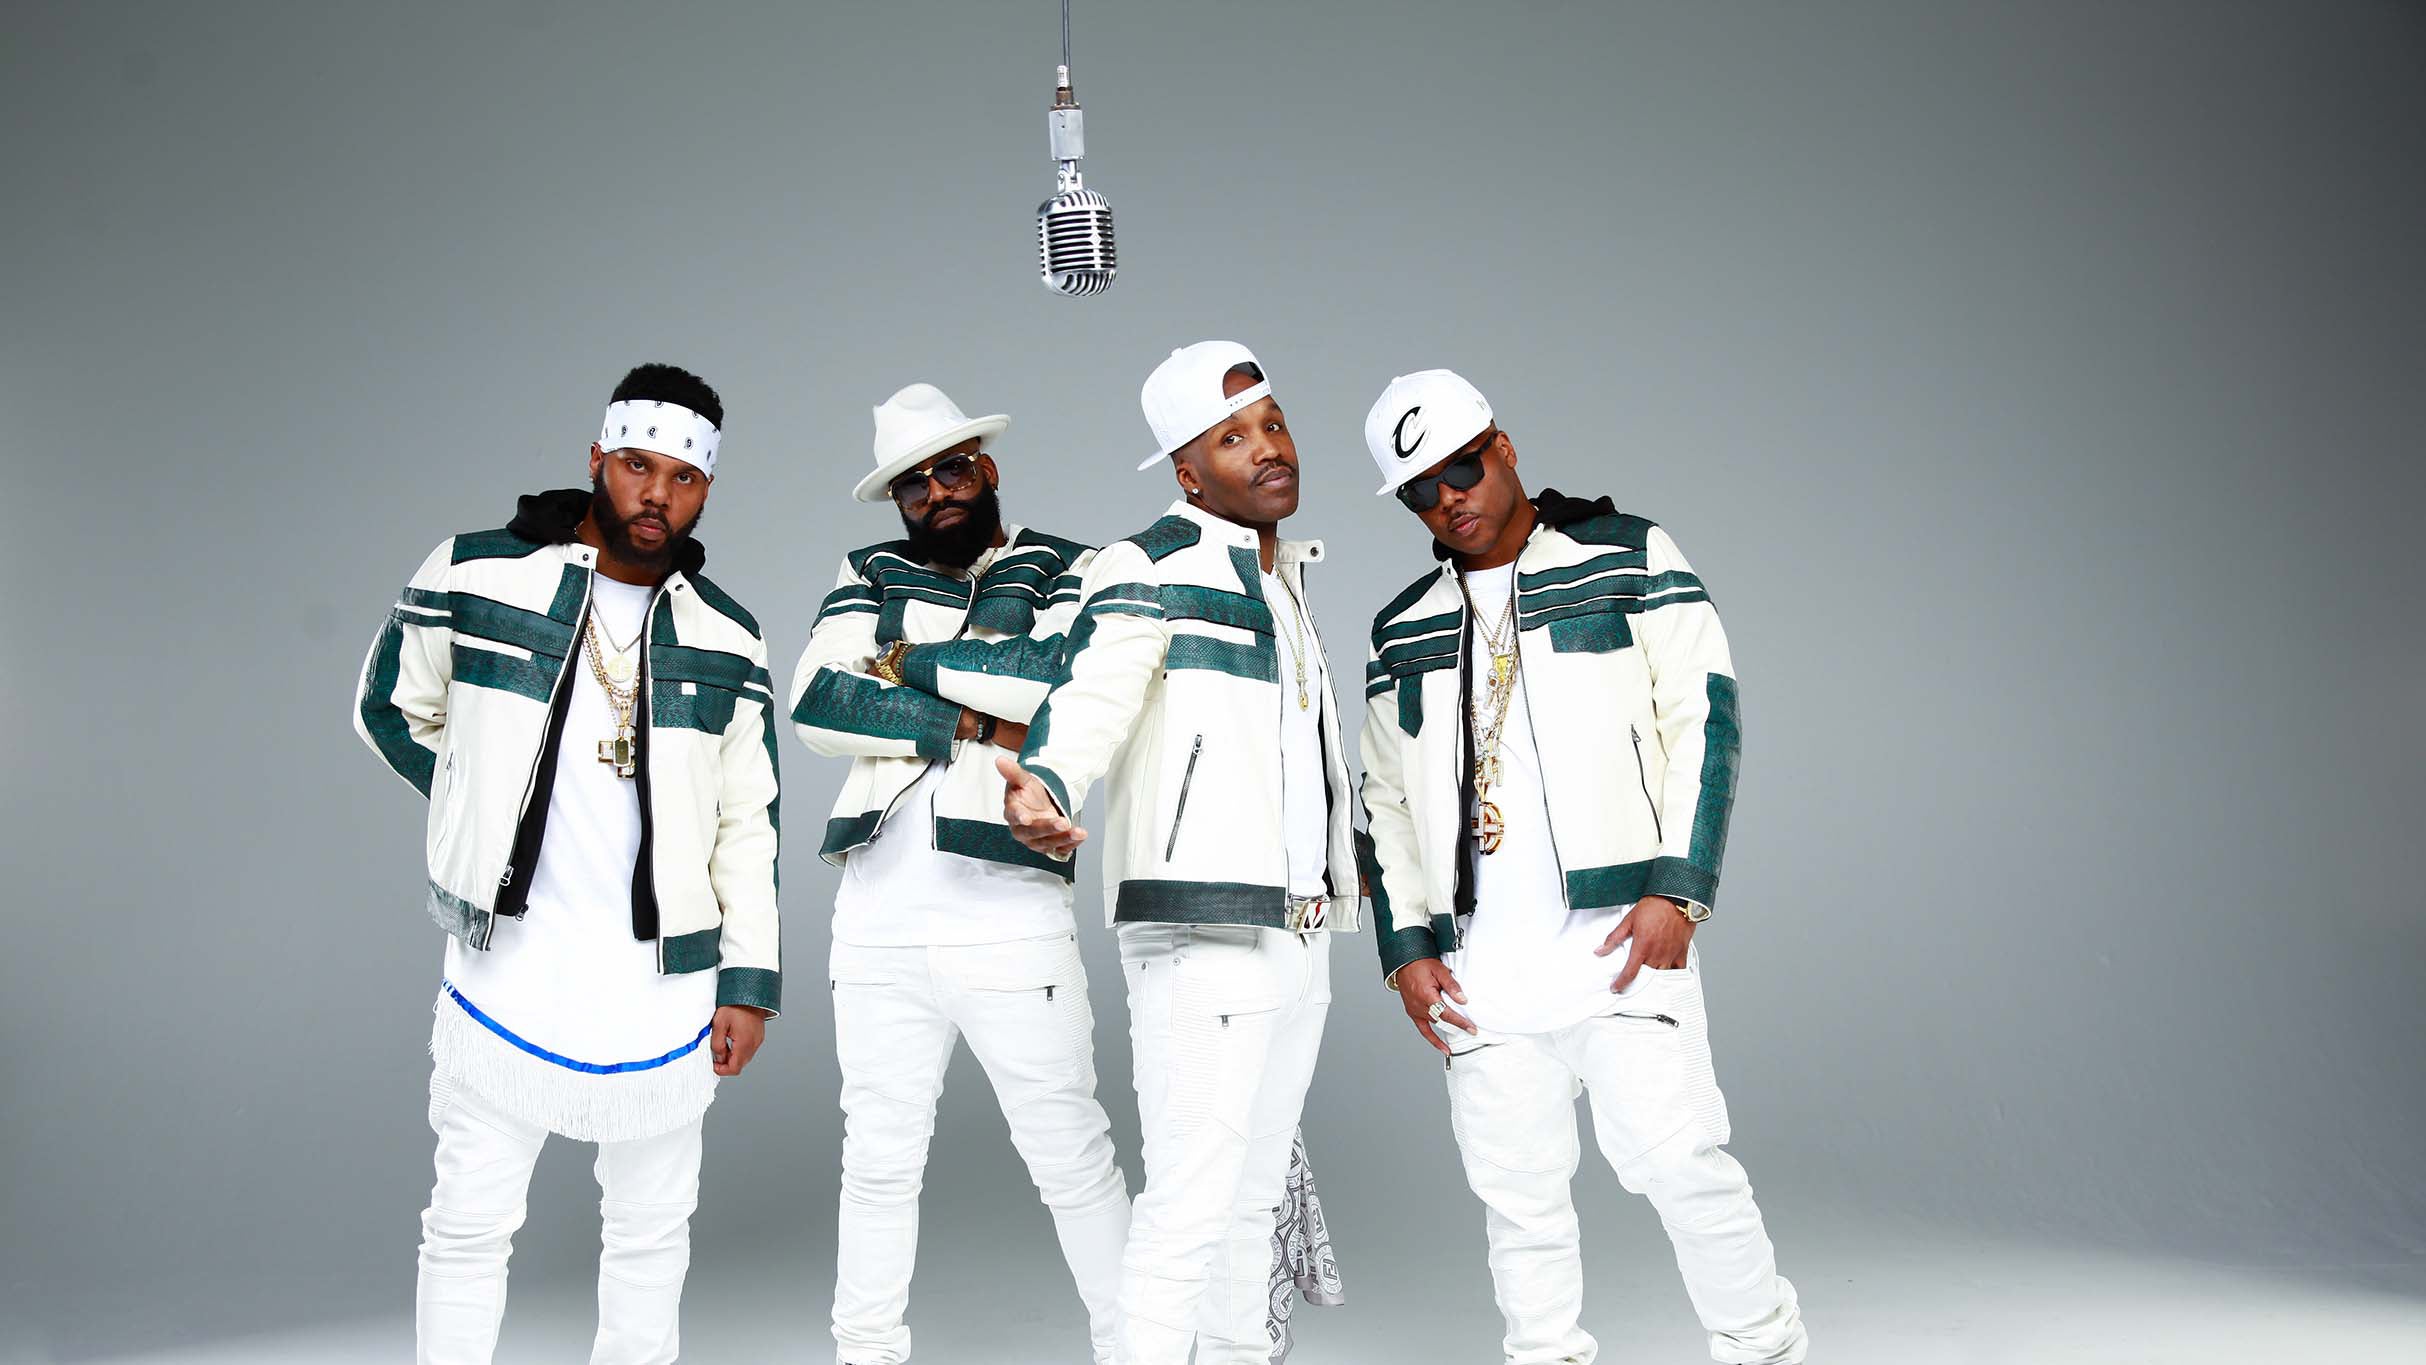 JAGGED EDGE & Special Guest NATURAL CHANGE in Dallas promo photo for Official Platinum presale offer code